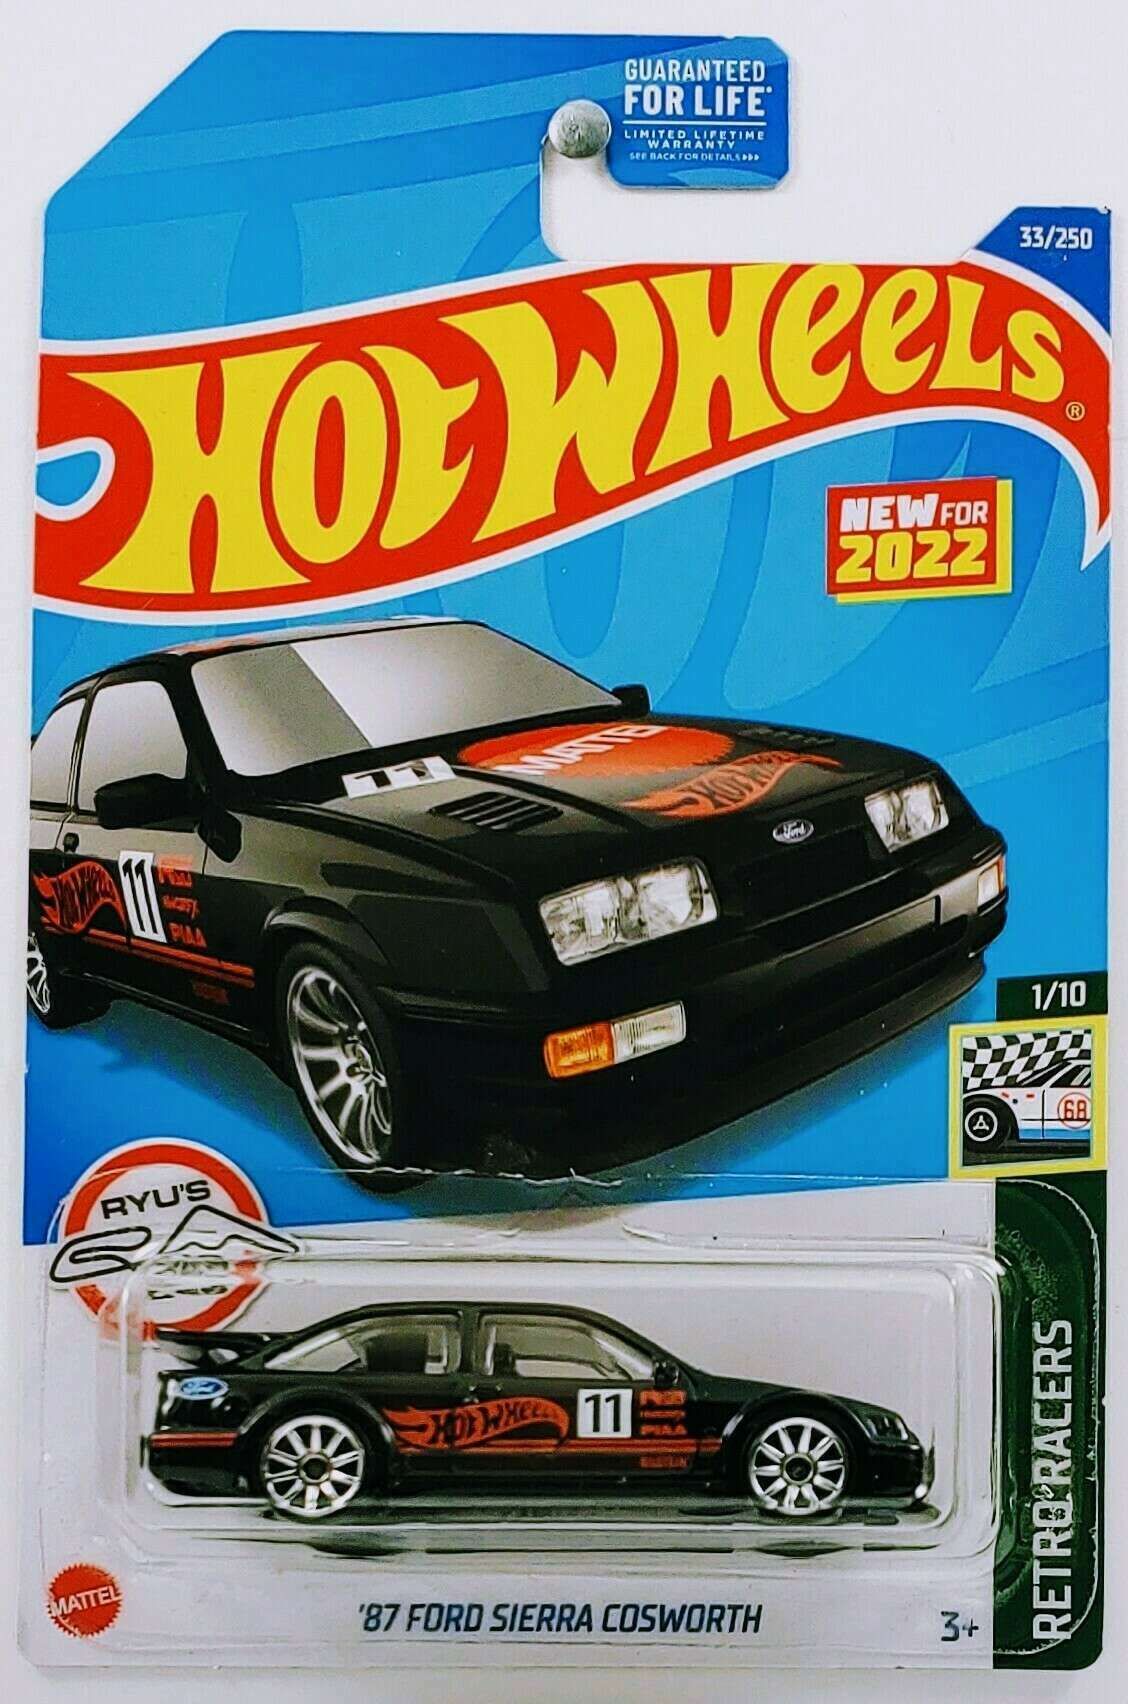 Hot Wheels 2022 - Collector # 033/250 - Retro Racers 1/10 - New Models - '87 Ford Sierra Cosworth - Black - USA Card